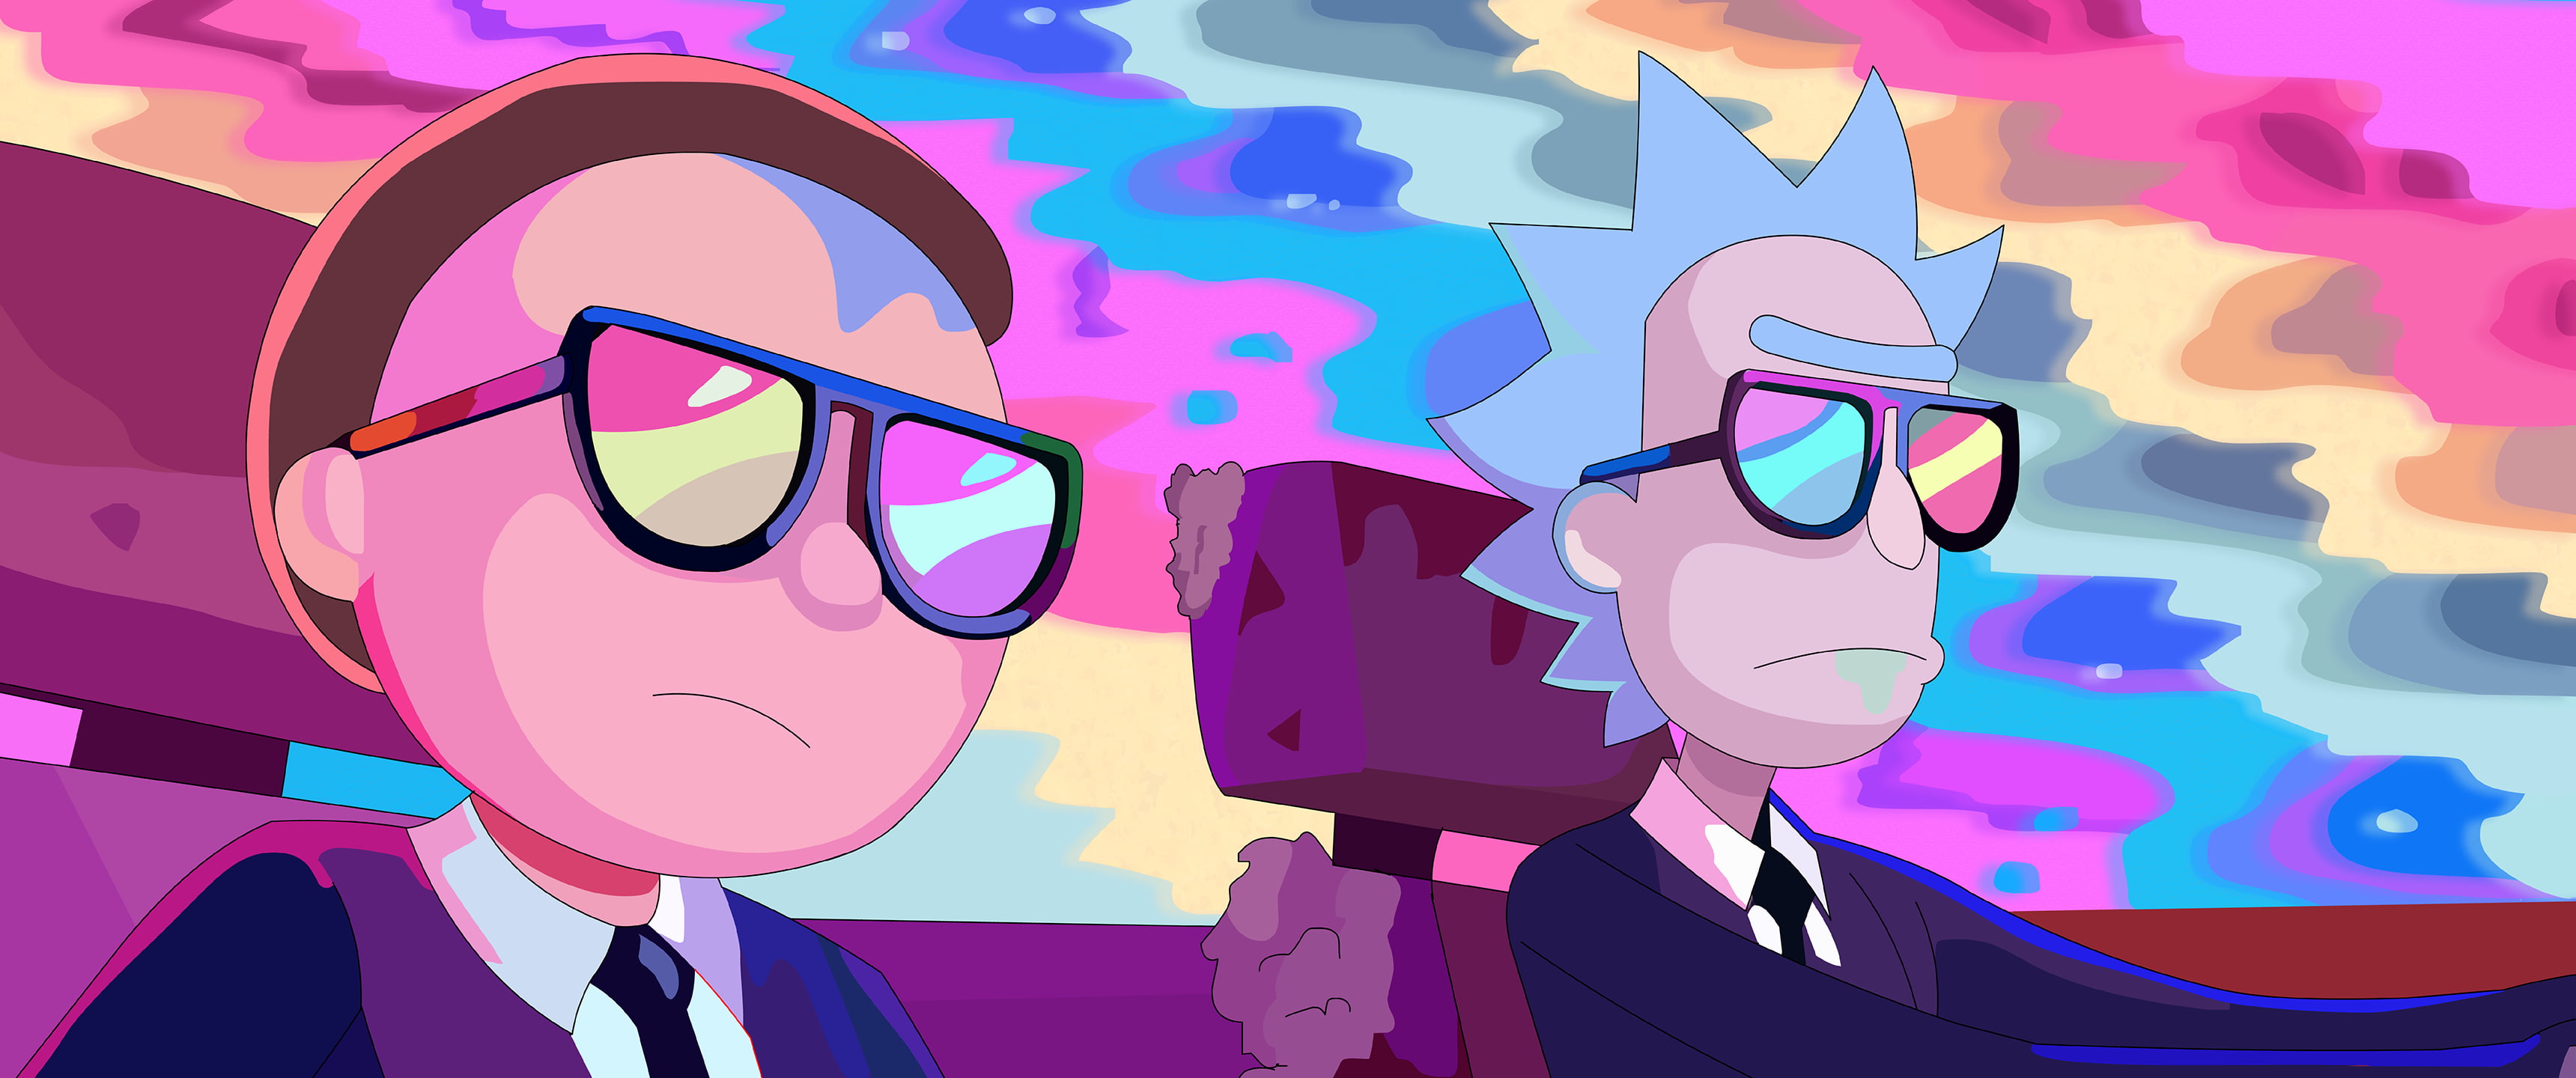 Rick and Morthy movie scene, Rick and Morty, Run the Jewels, vector graphics